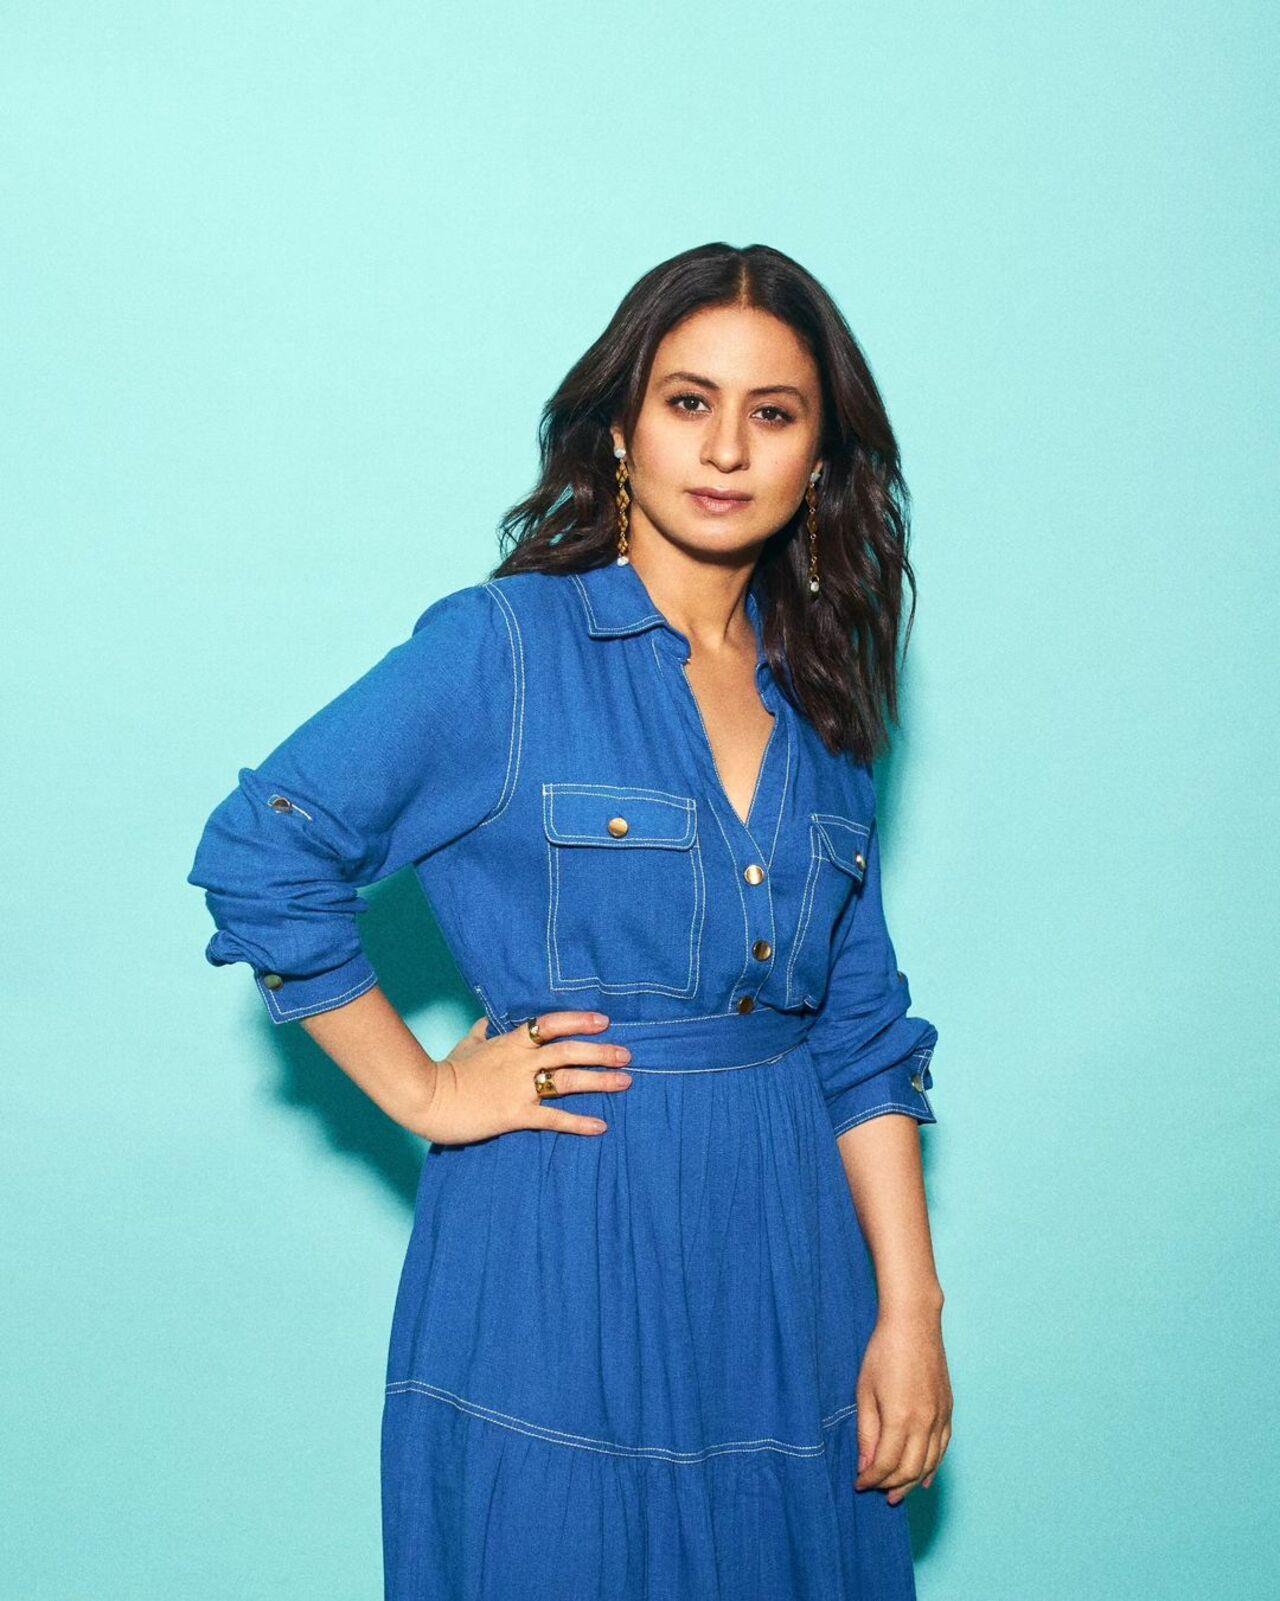 After doing mediocre roles in films, Rasika Dugal unleashed her acting prowess in the web series 'Mirzapur'. She also essayed the role of a police officer in 'Delhi Crime'. 